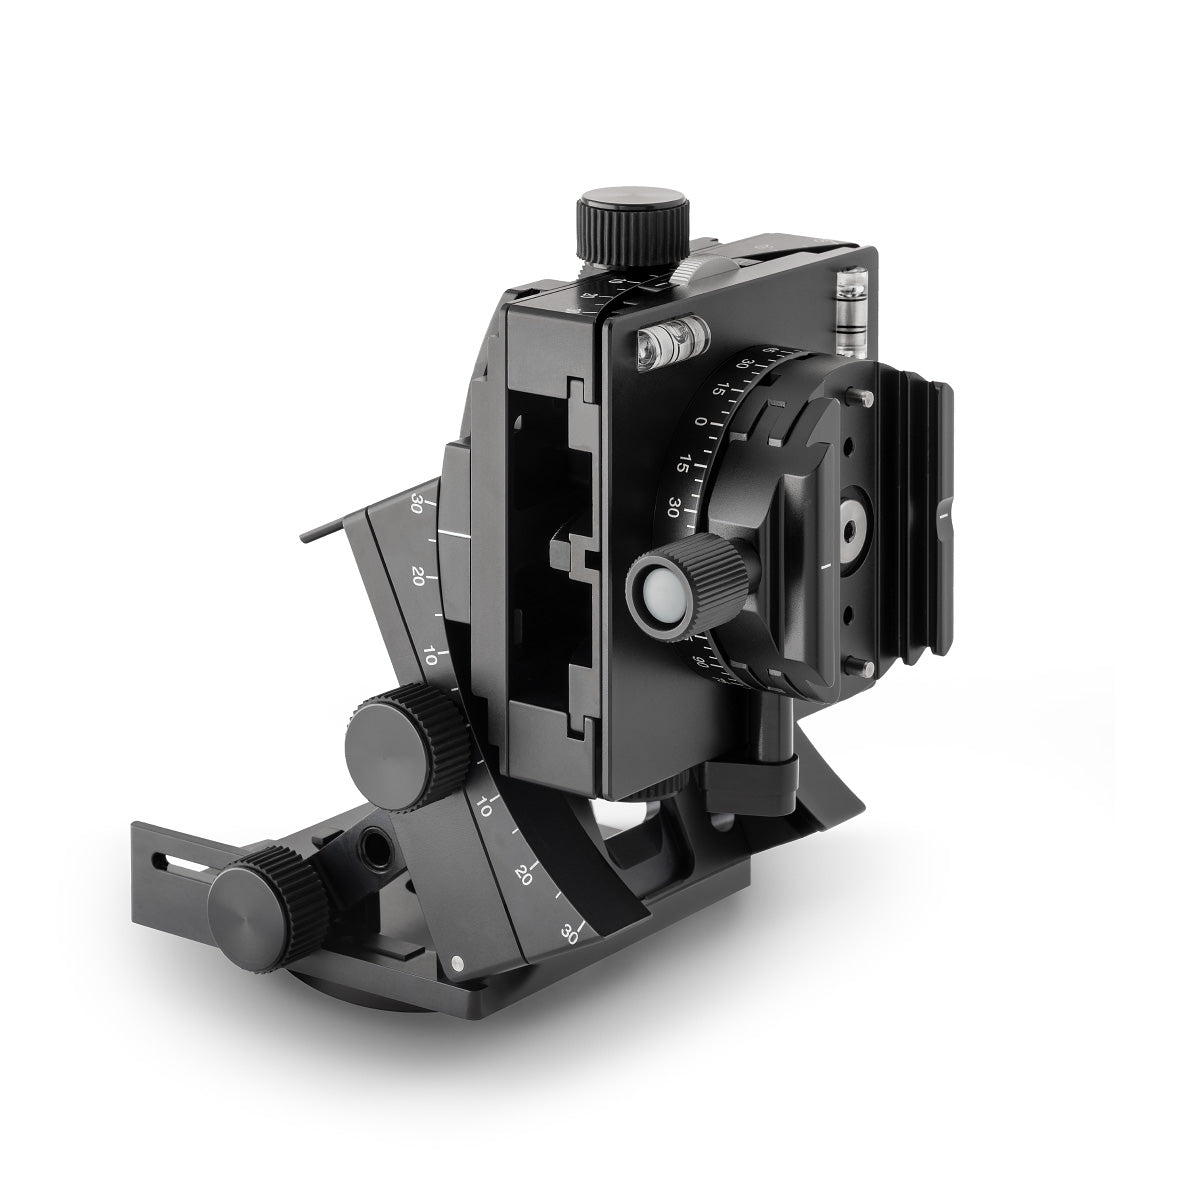 Arca-Swiss C1 Cube geared tripod head with Classic quick release, opened to the 90 degree vertical orientation position, 3/4 view, model 8501003.1 from Arca-Swiss USA.